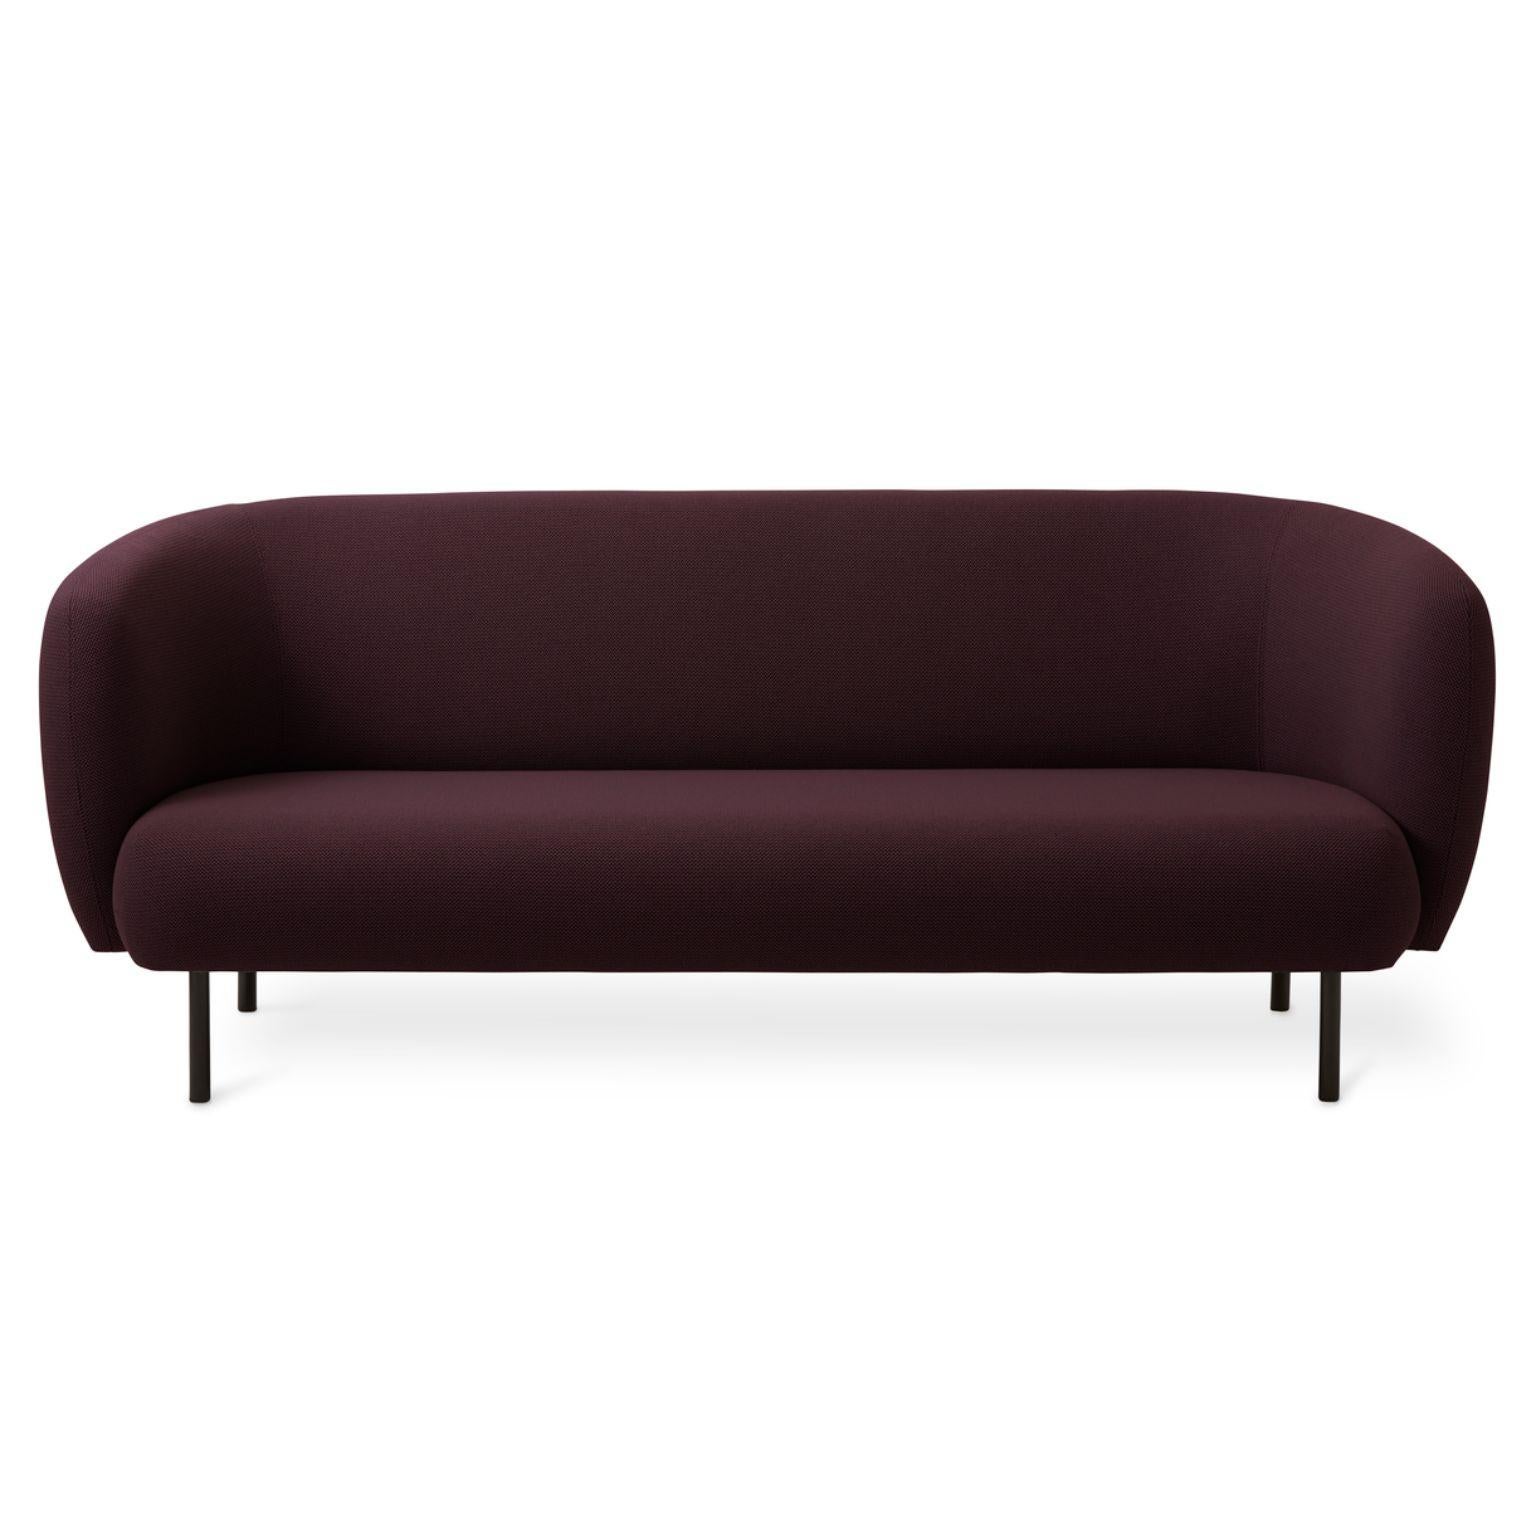 Caper 3 seater burgundy by Warm Nordic
Dimensions: D 206 x W 84 x H 63 cm
Material: Textile upholstery, Wooden frame, Powder coated black steel legs.
Weight: 55.5 kg
Also available in different colours and finishes.

An elegant sofa with an